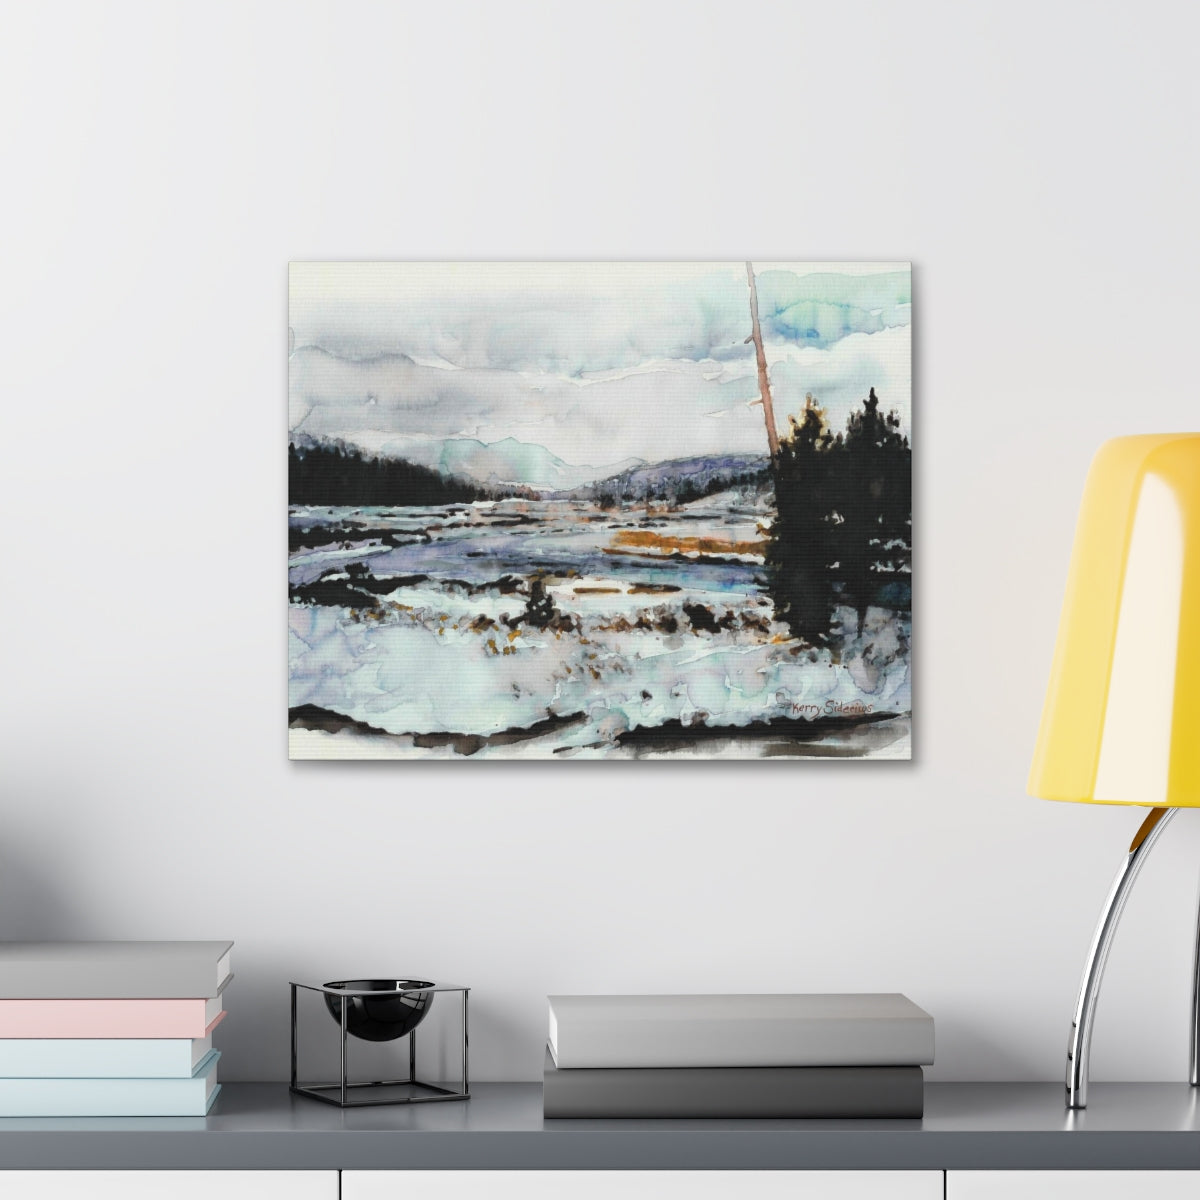 "Snowy Methow Scene" Wrapped Canvas (3 Sizes) - Kerry Siderius Art 